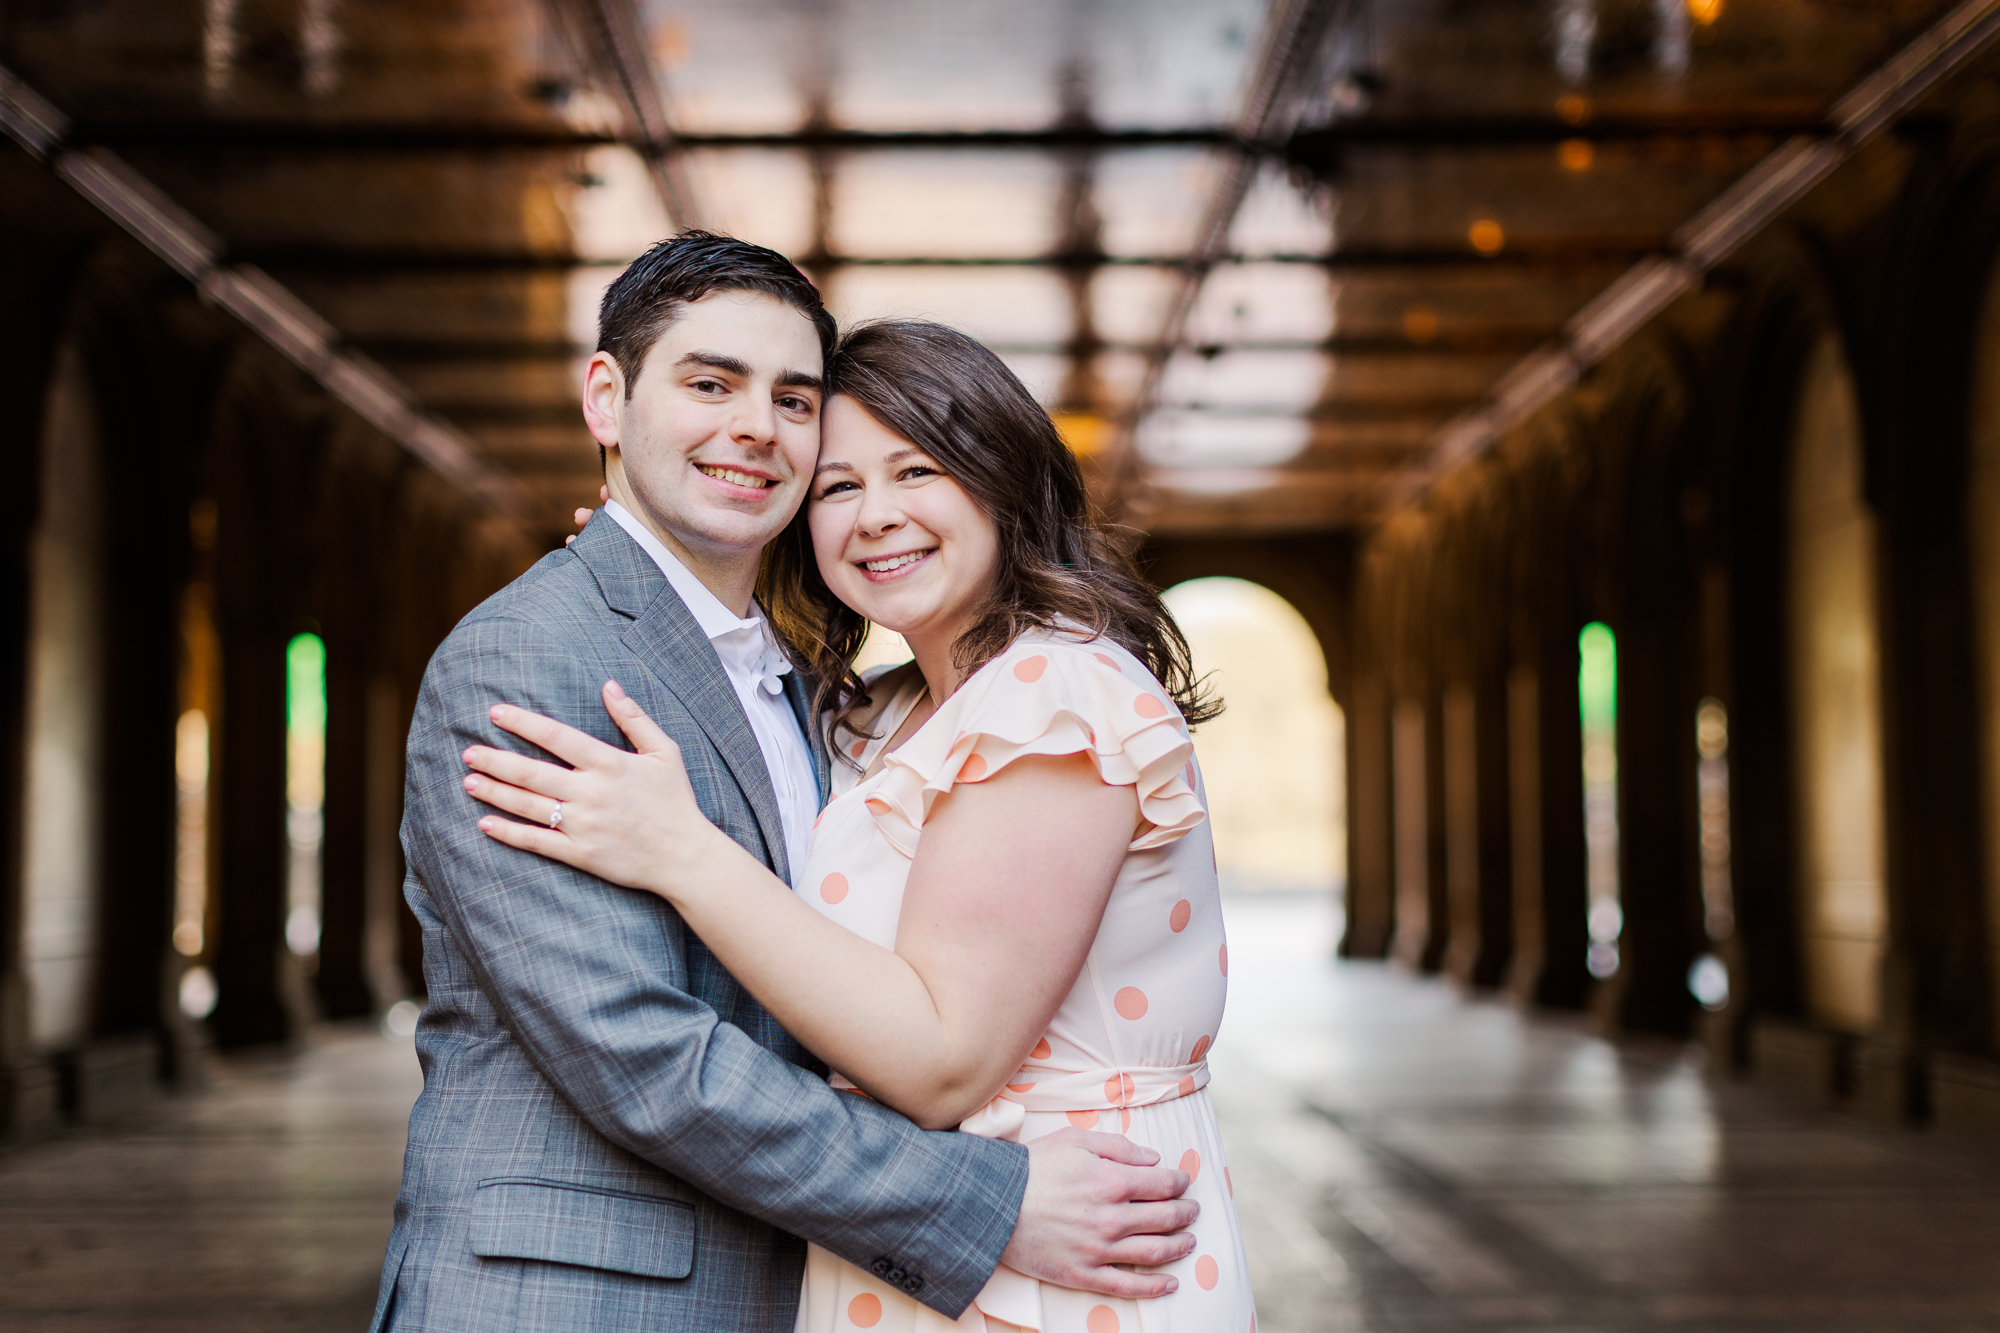 Vibrant Spring Engagement Photography in NYC